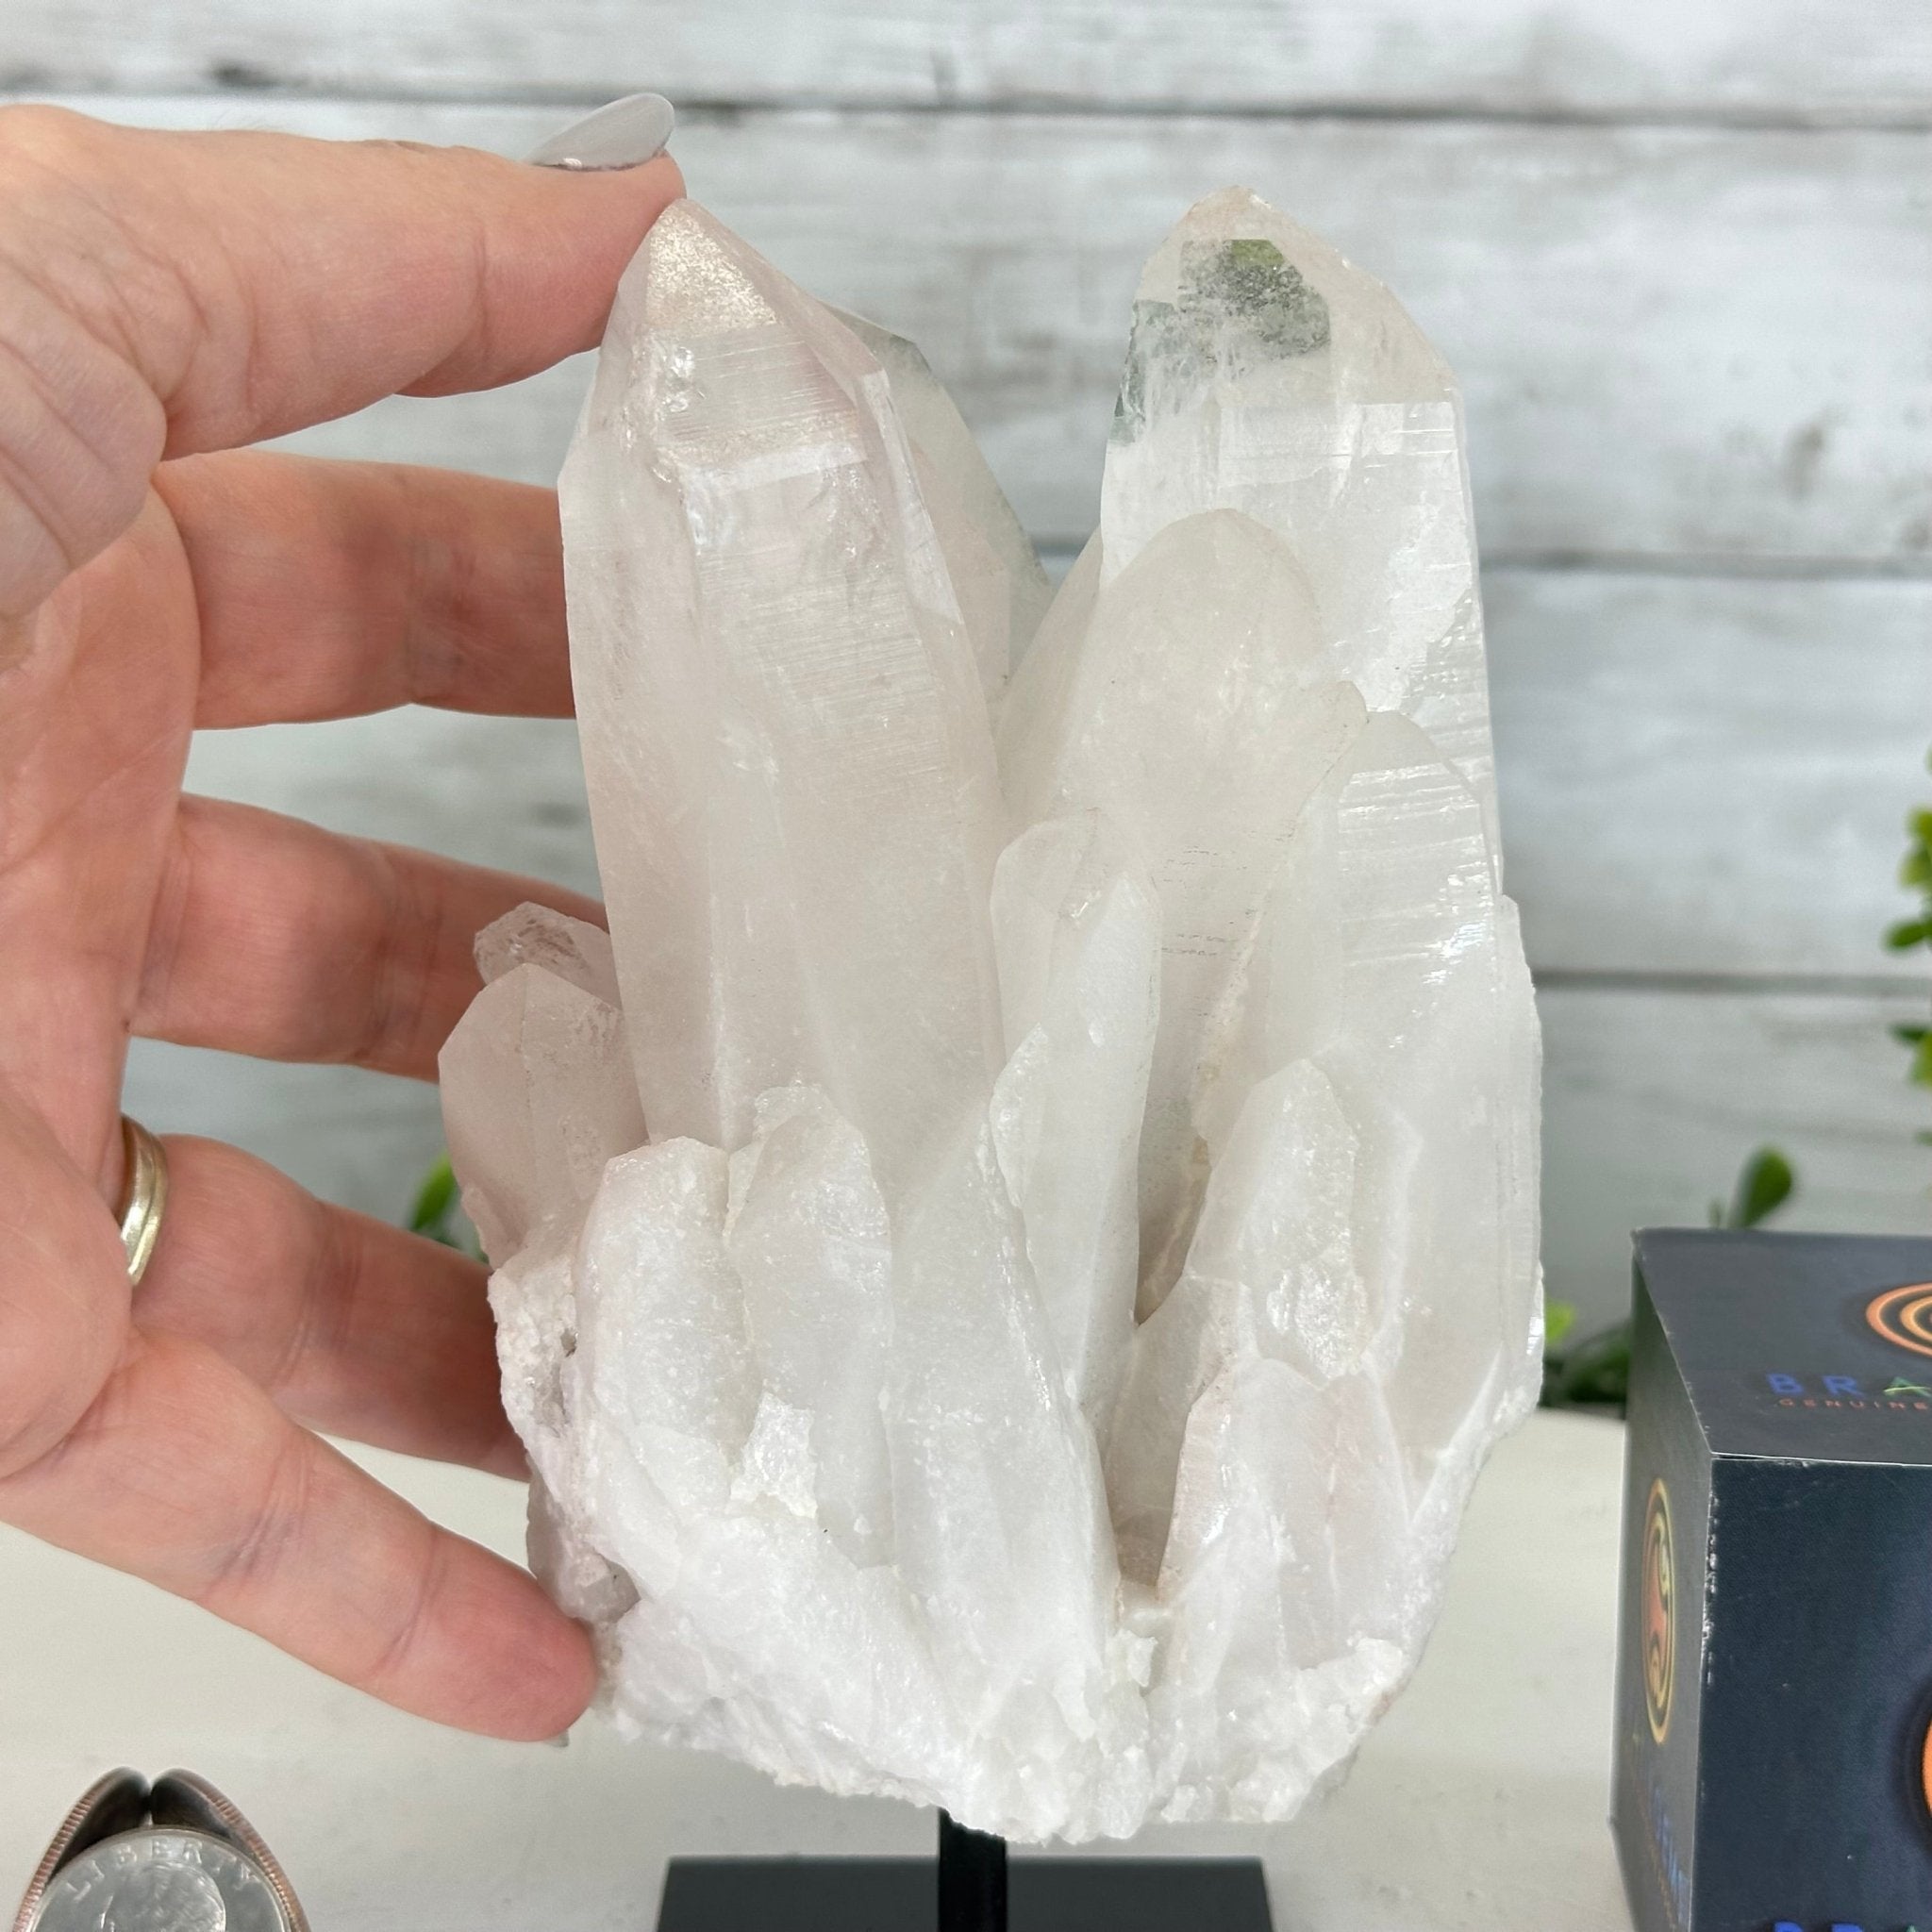 Clear Quartz Crystal Point on Fixed Base, 2.3 lbs & 6.7" Tall #3122CQ-006 - Brazil GemsBrazil GemsClear Quartz Crystal Point on Fixed Base, 2.3 lbs & 6.7" Tall #3122CQ-006Crystal Points3122CQ-006